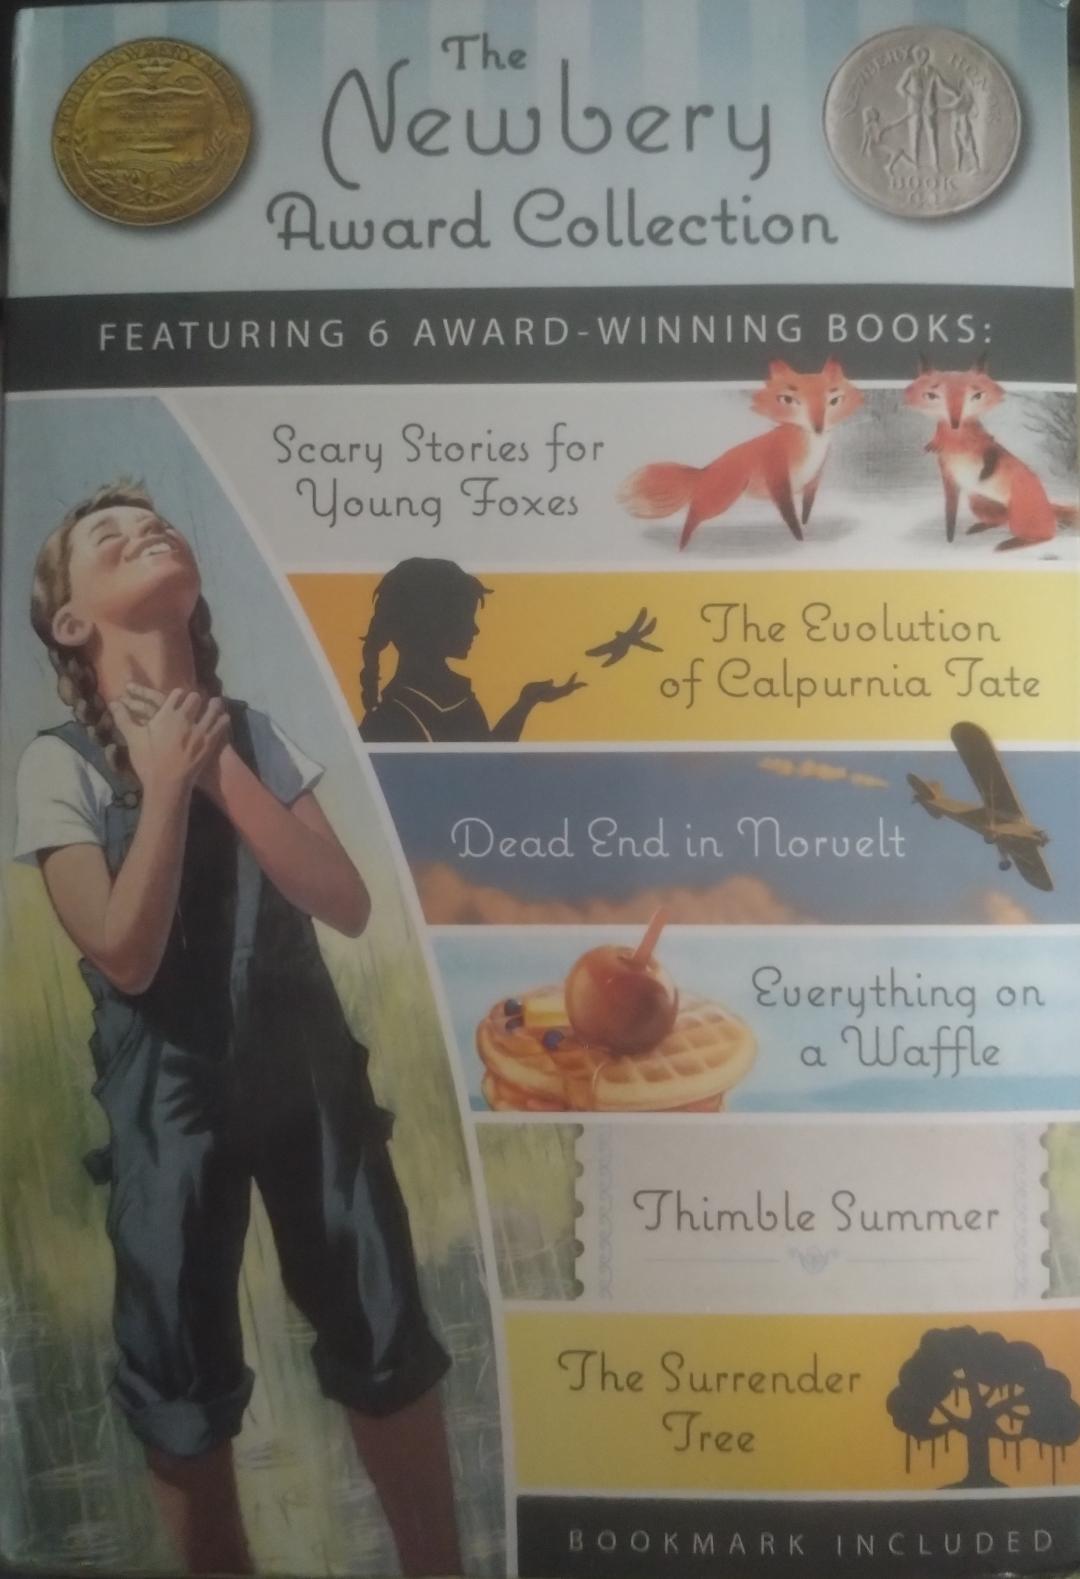 The Newbery Award Collection